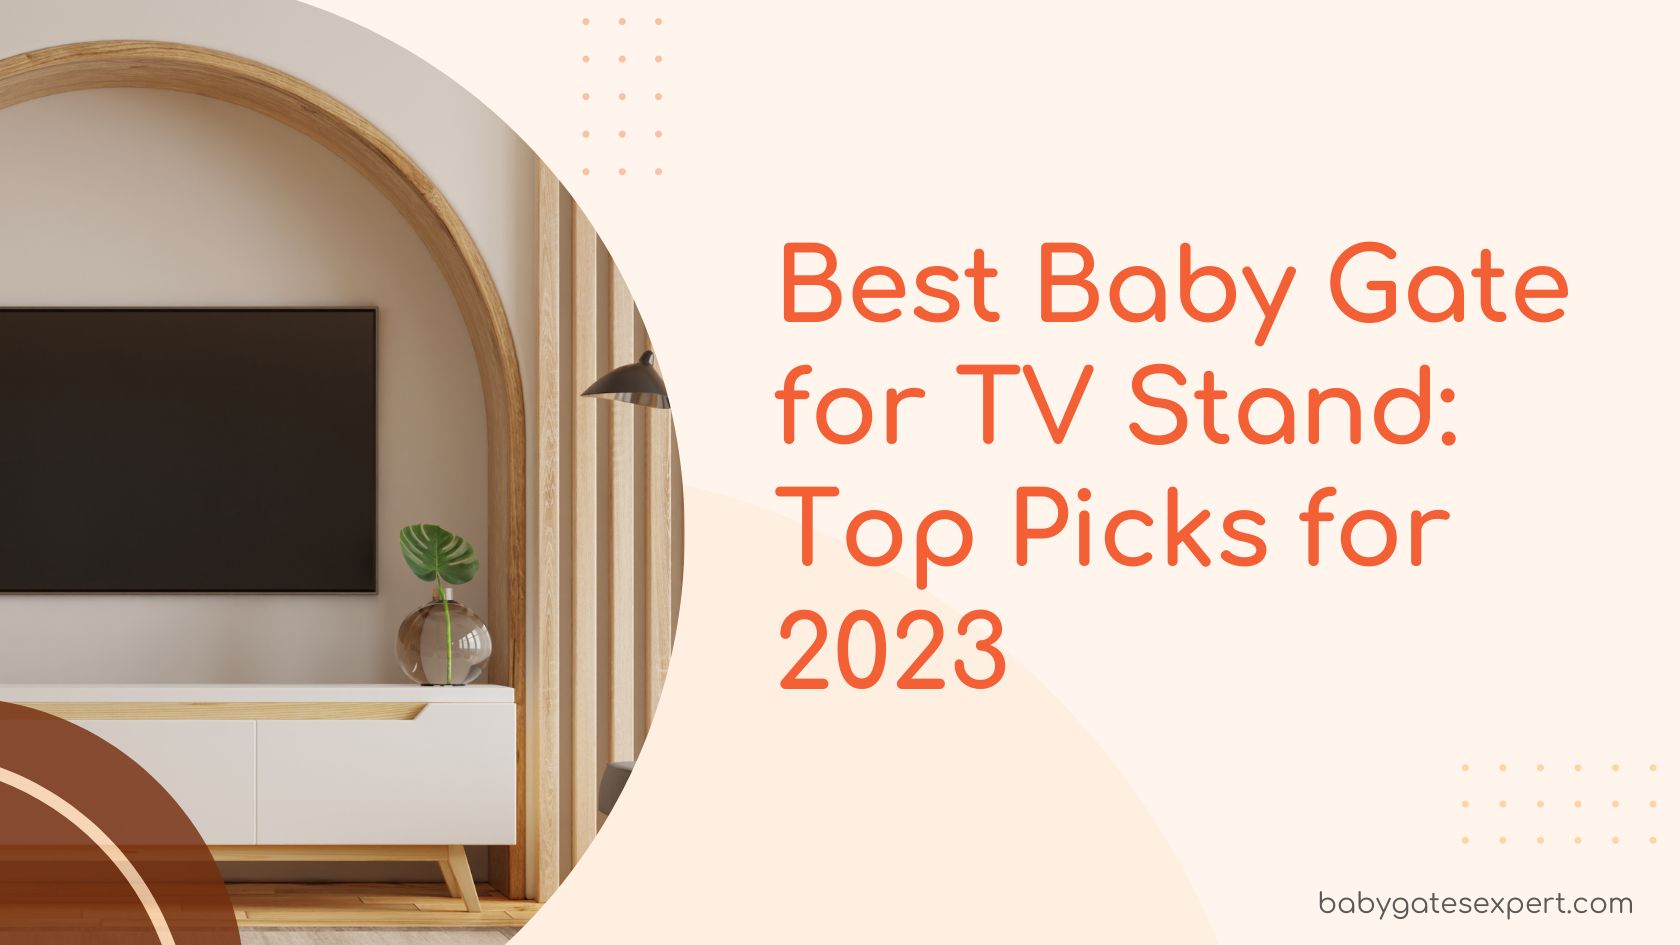 Best Baby Gate for TV Stand